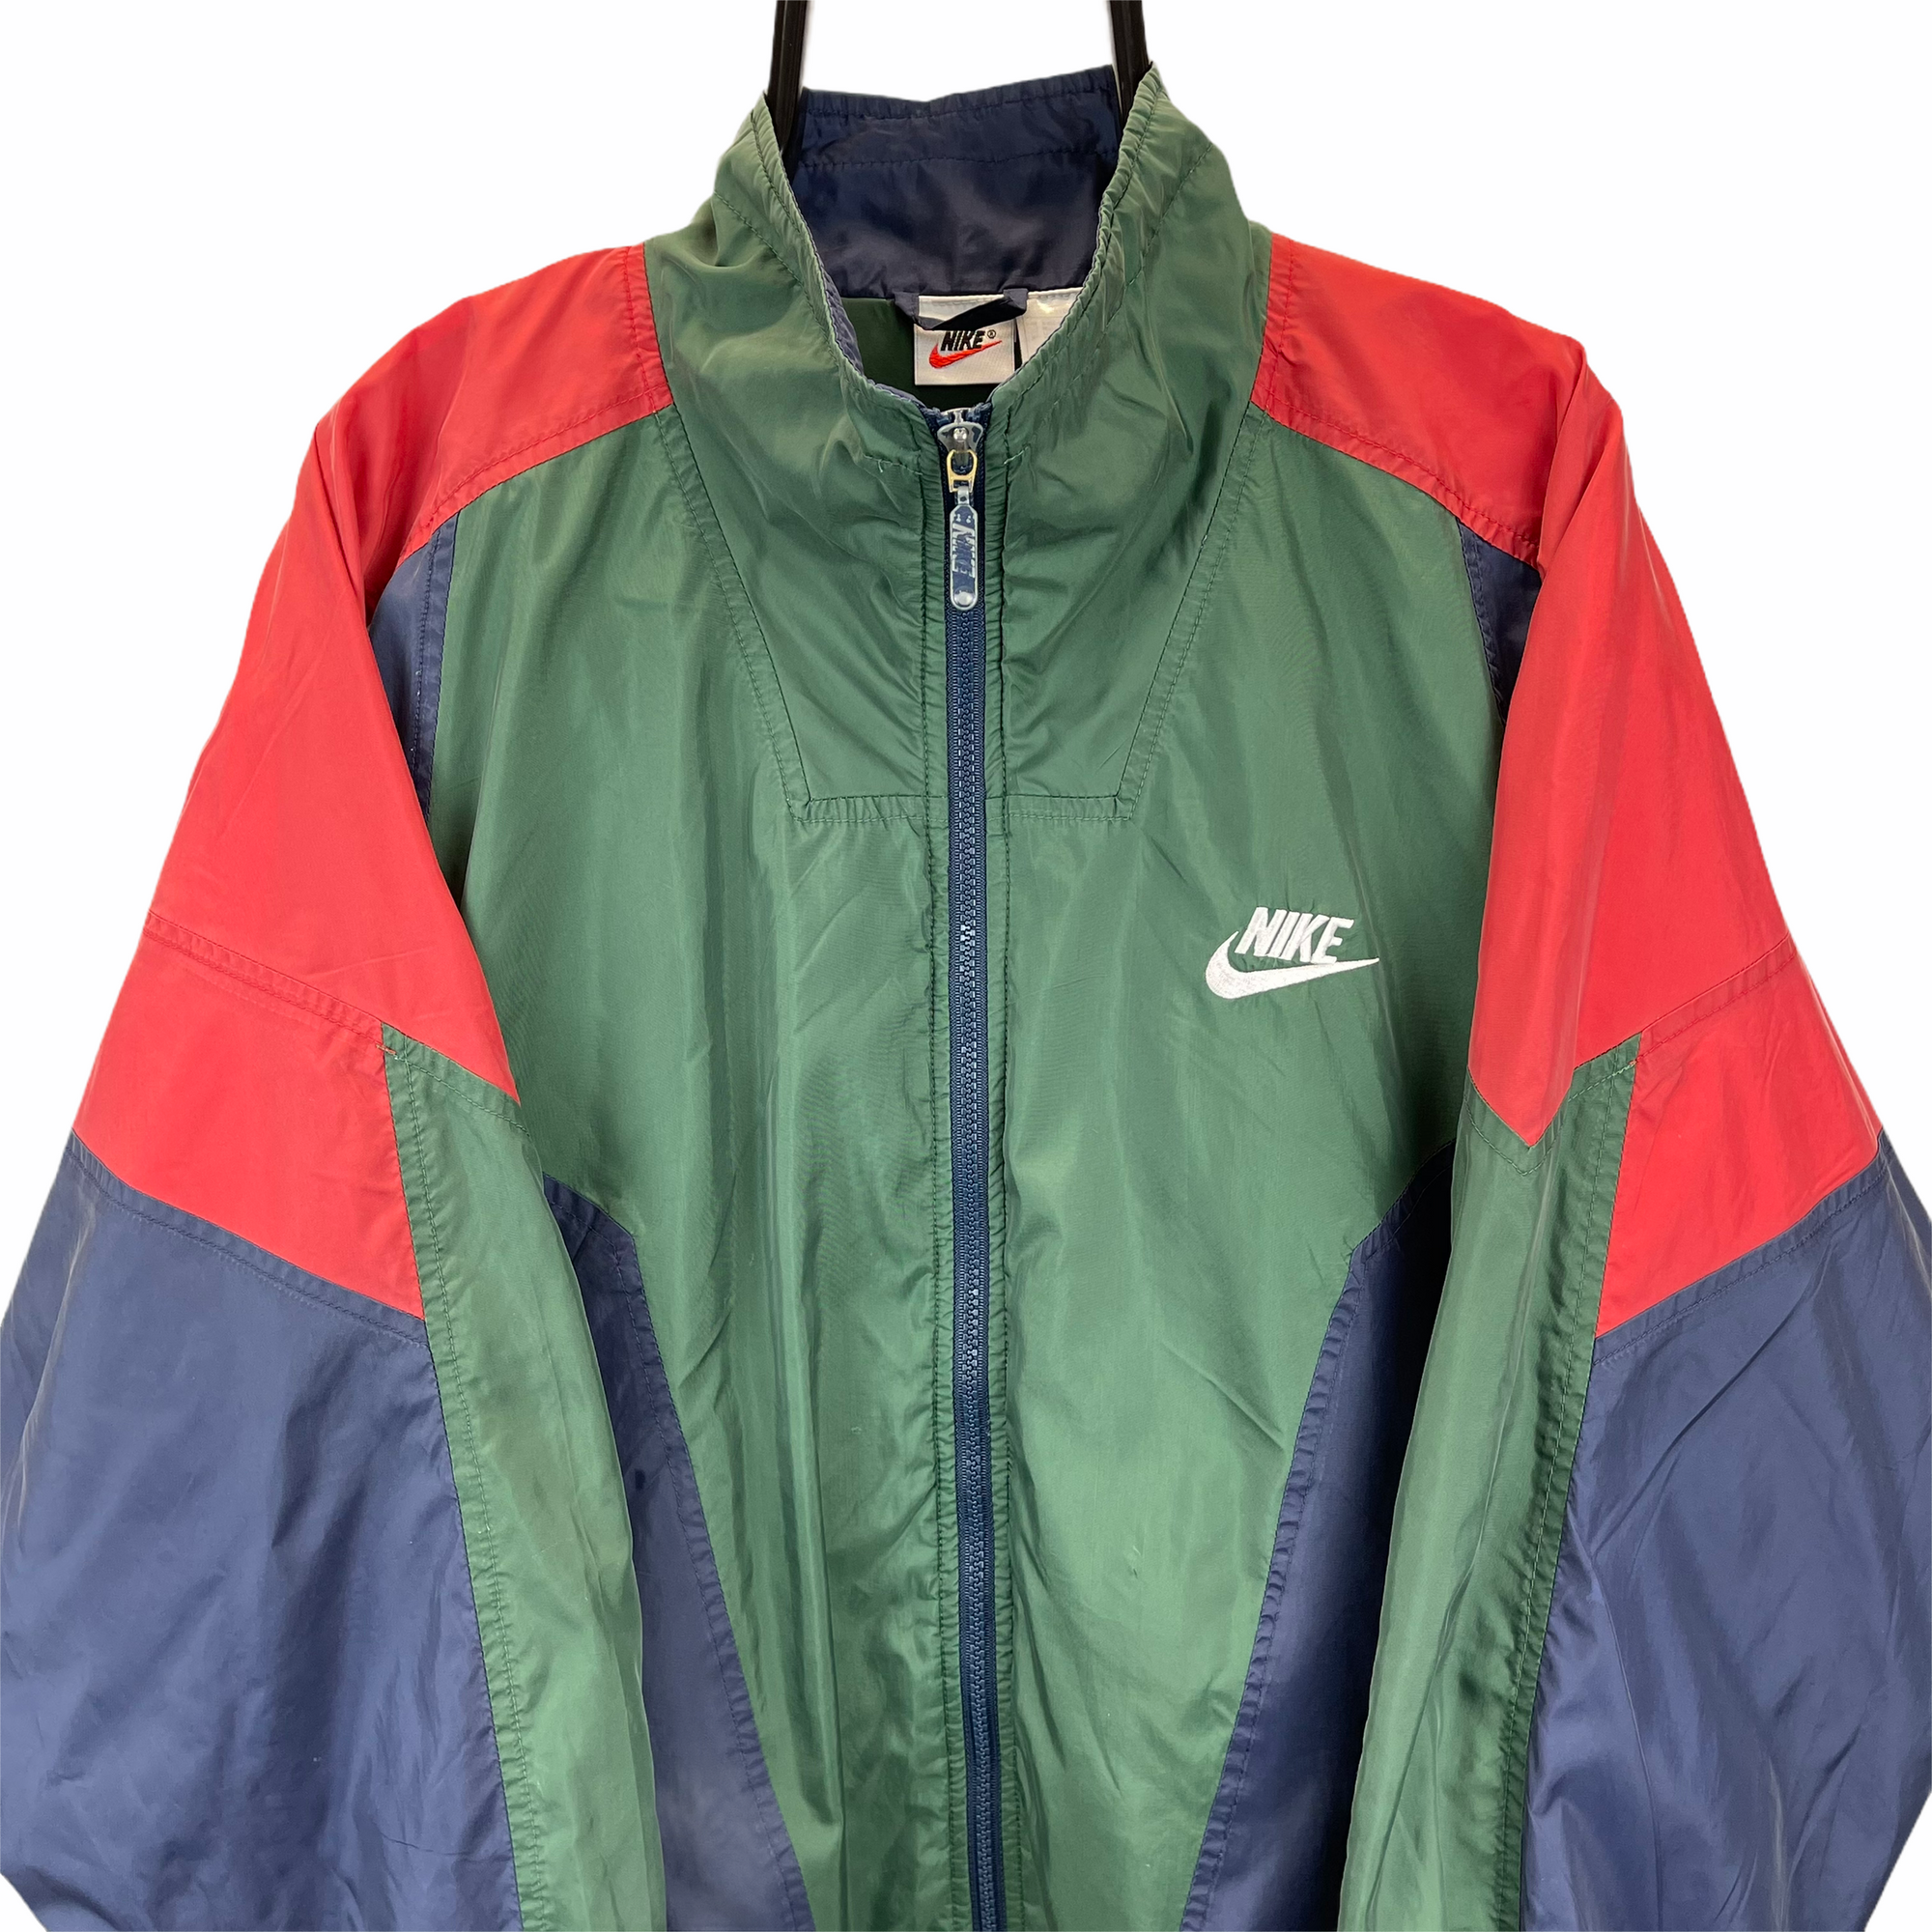 VINTAGE 90S NIKE TRACK JACKET IN GREEN, NAVY & RED - MEN'S LARGE/WOMEN'S XL